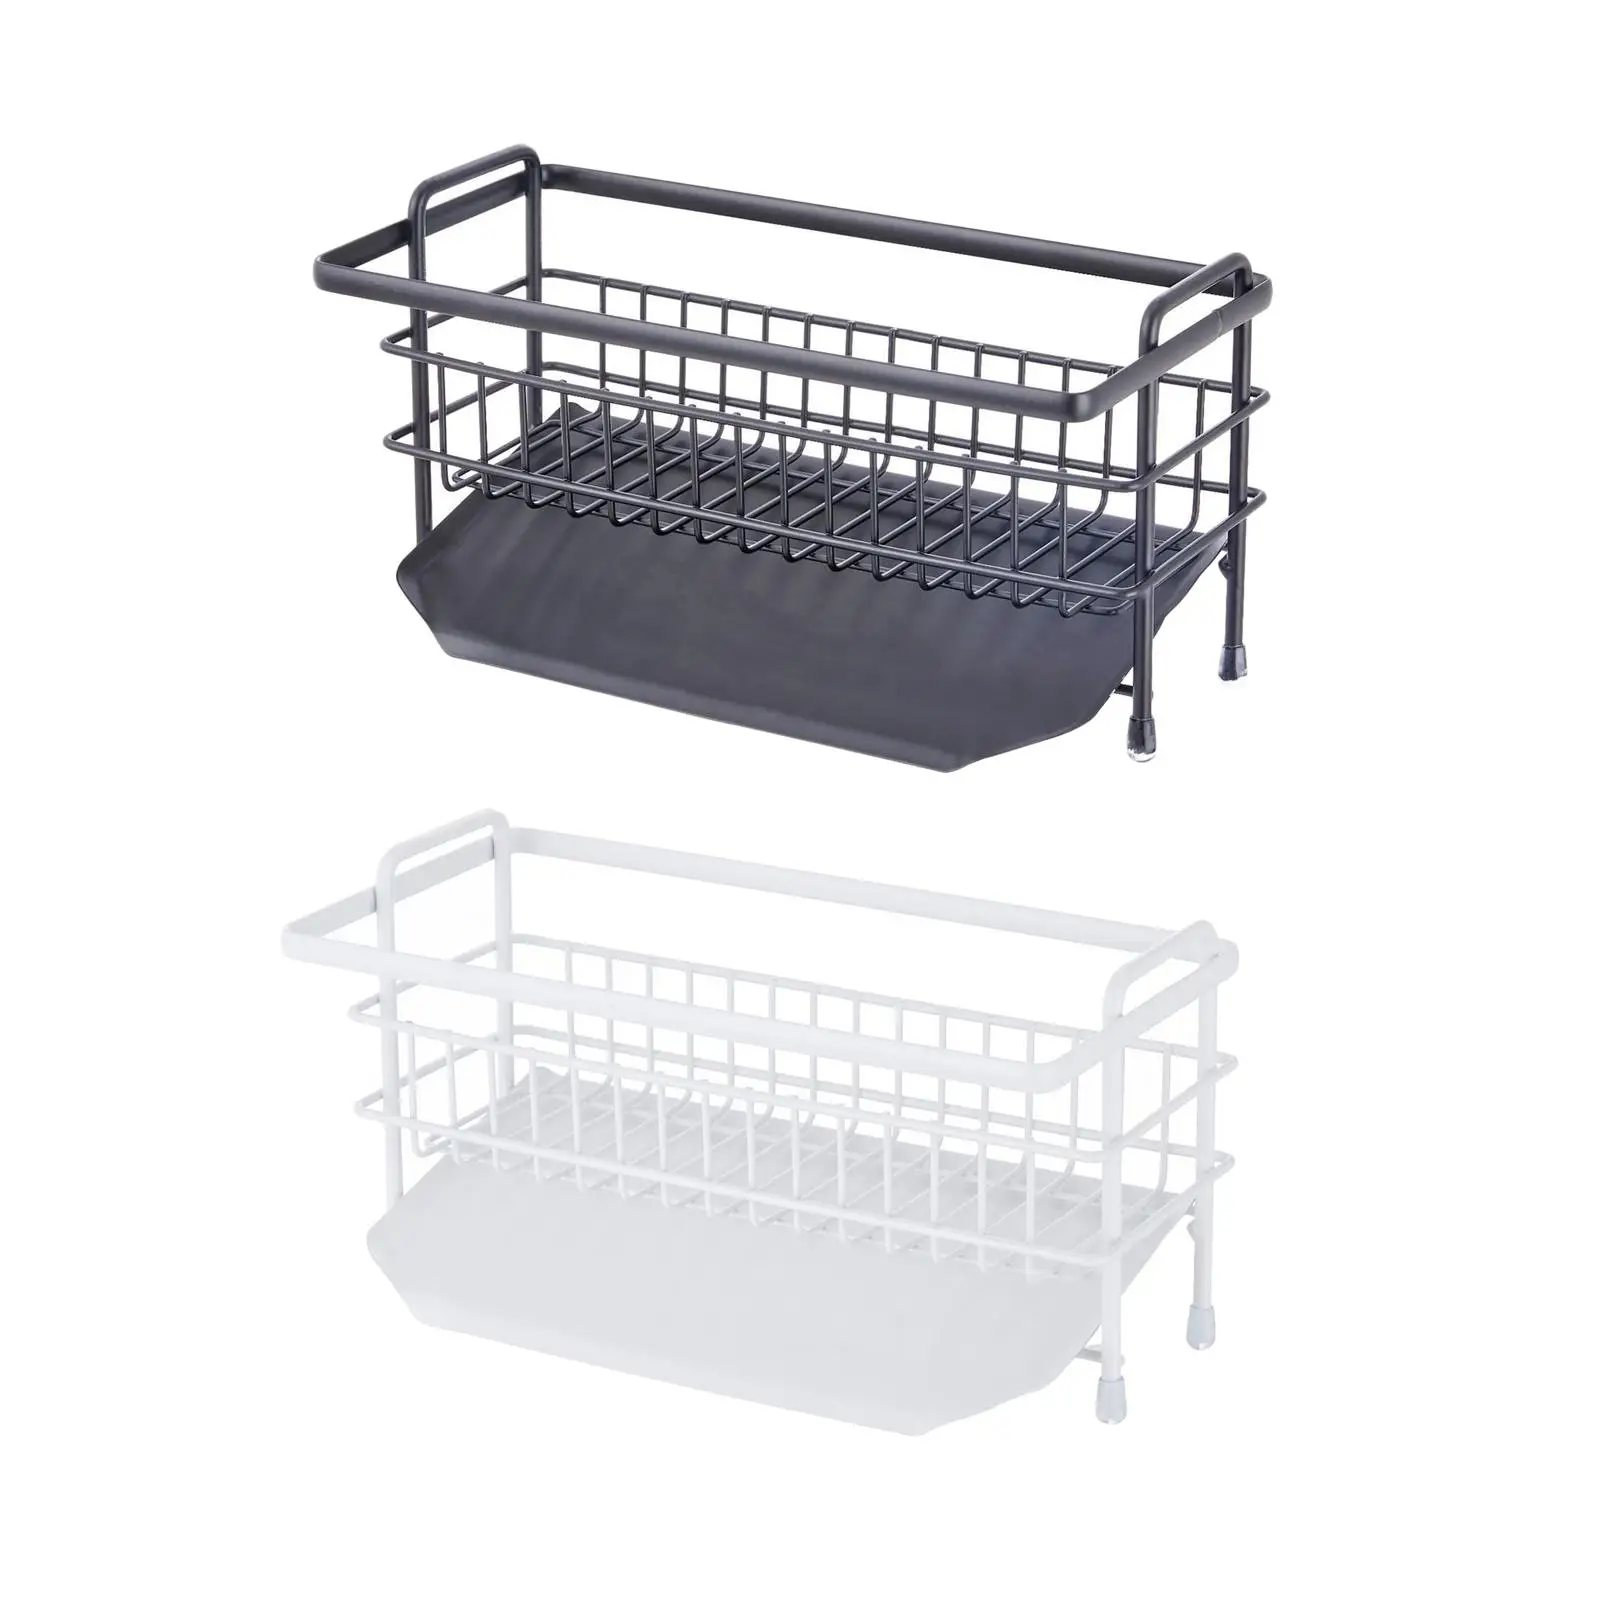 Stainless Steel Sink Tray Drainer Rack Easy Clean Free Standing for Bathroom